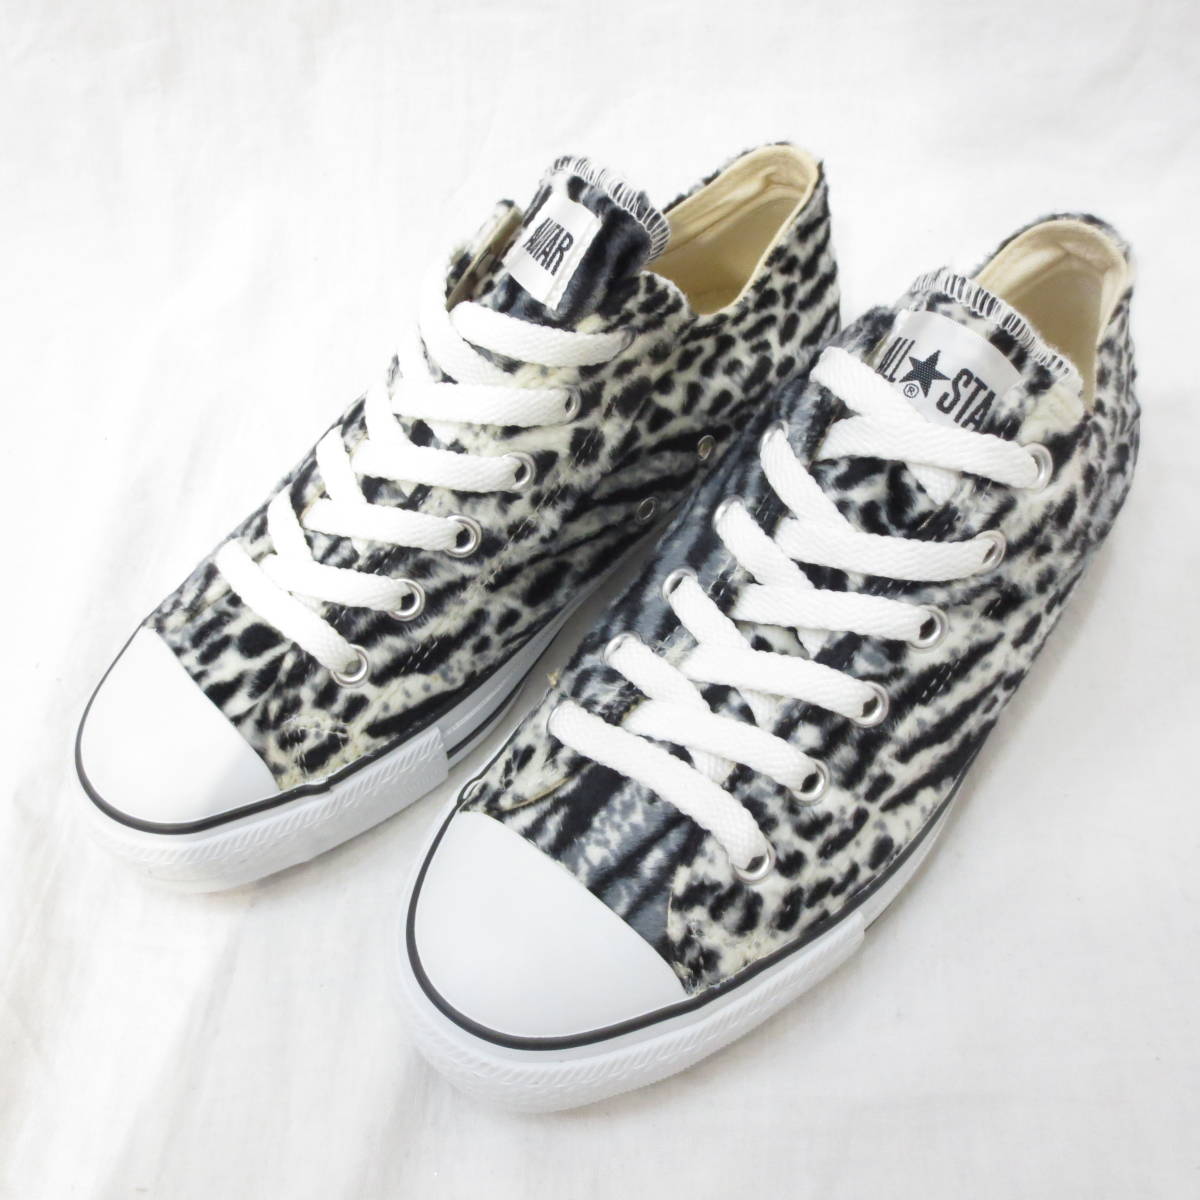 converse ALL STAR LOW panther Vintage コンバース オールスター ロー レオパード ヴィンテージ ヒョウ柄 限定品 6.5